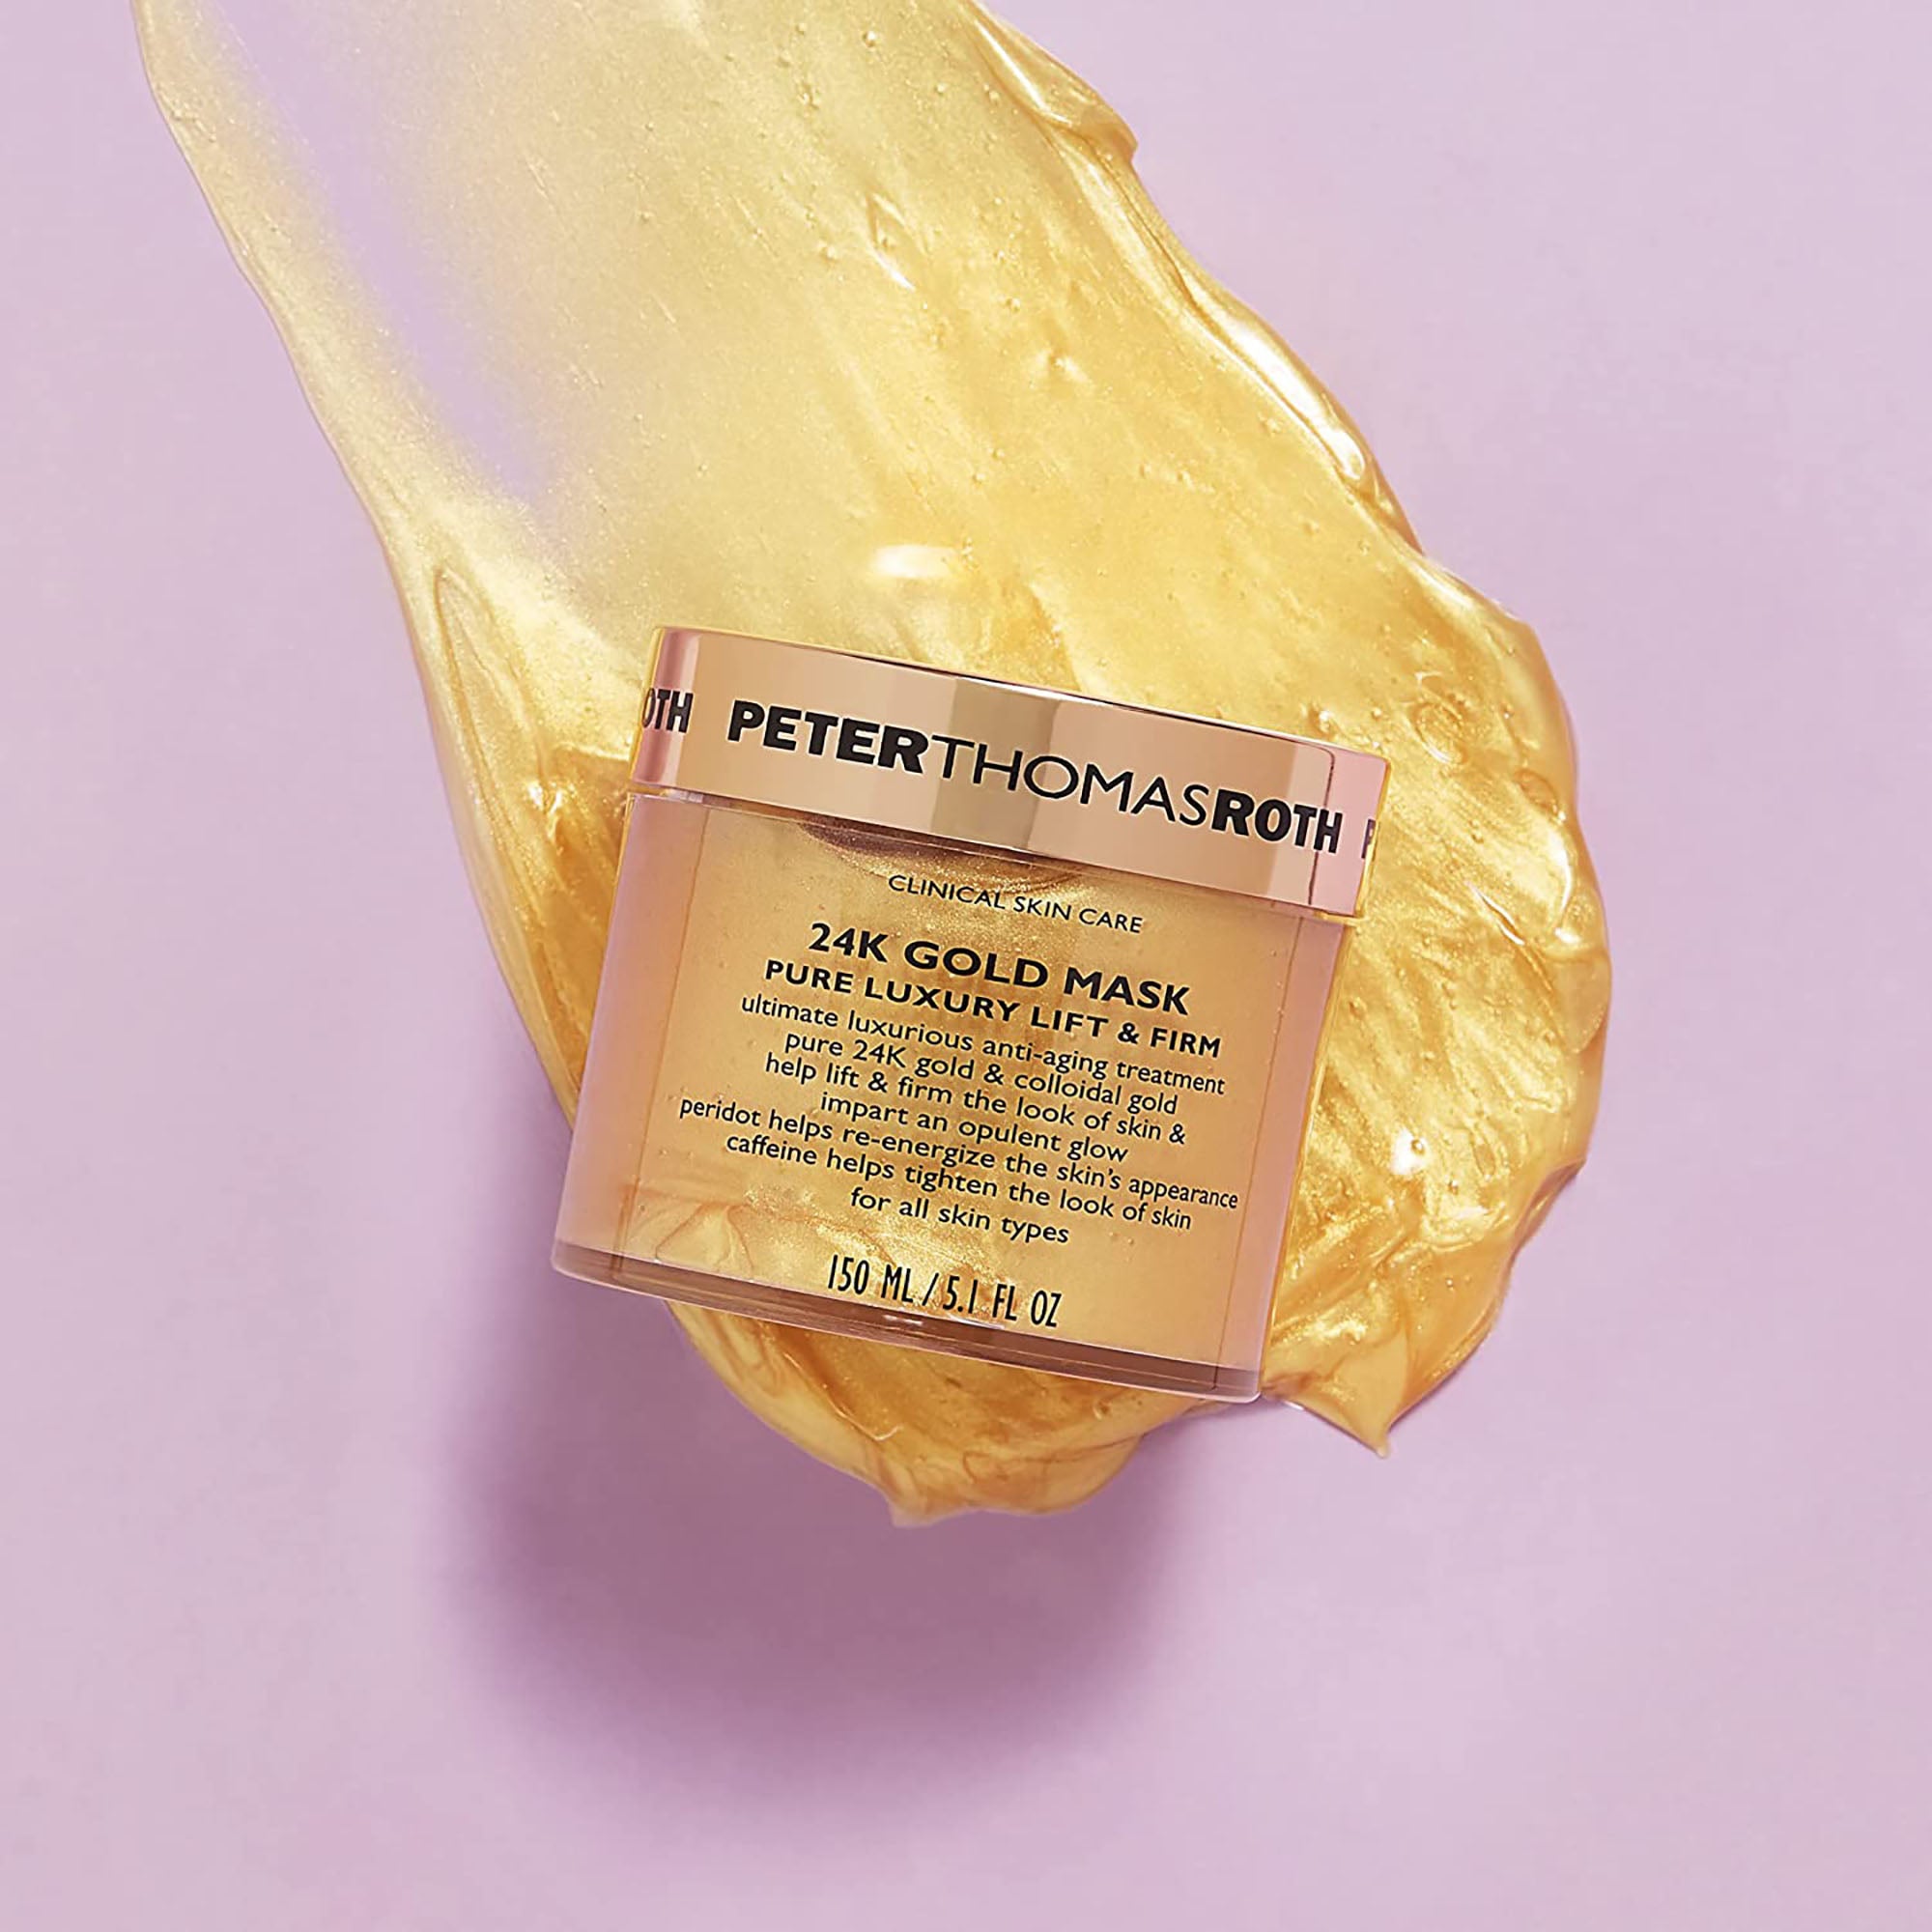 Peter Thomas Roth 24K Gold Mask Pure Luxury Lift & Firm / 5 OZ